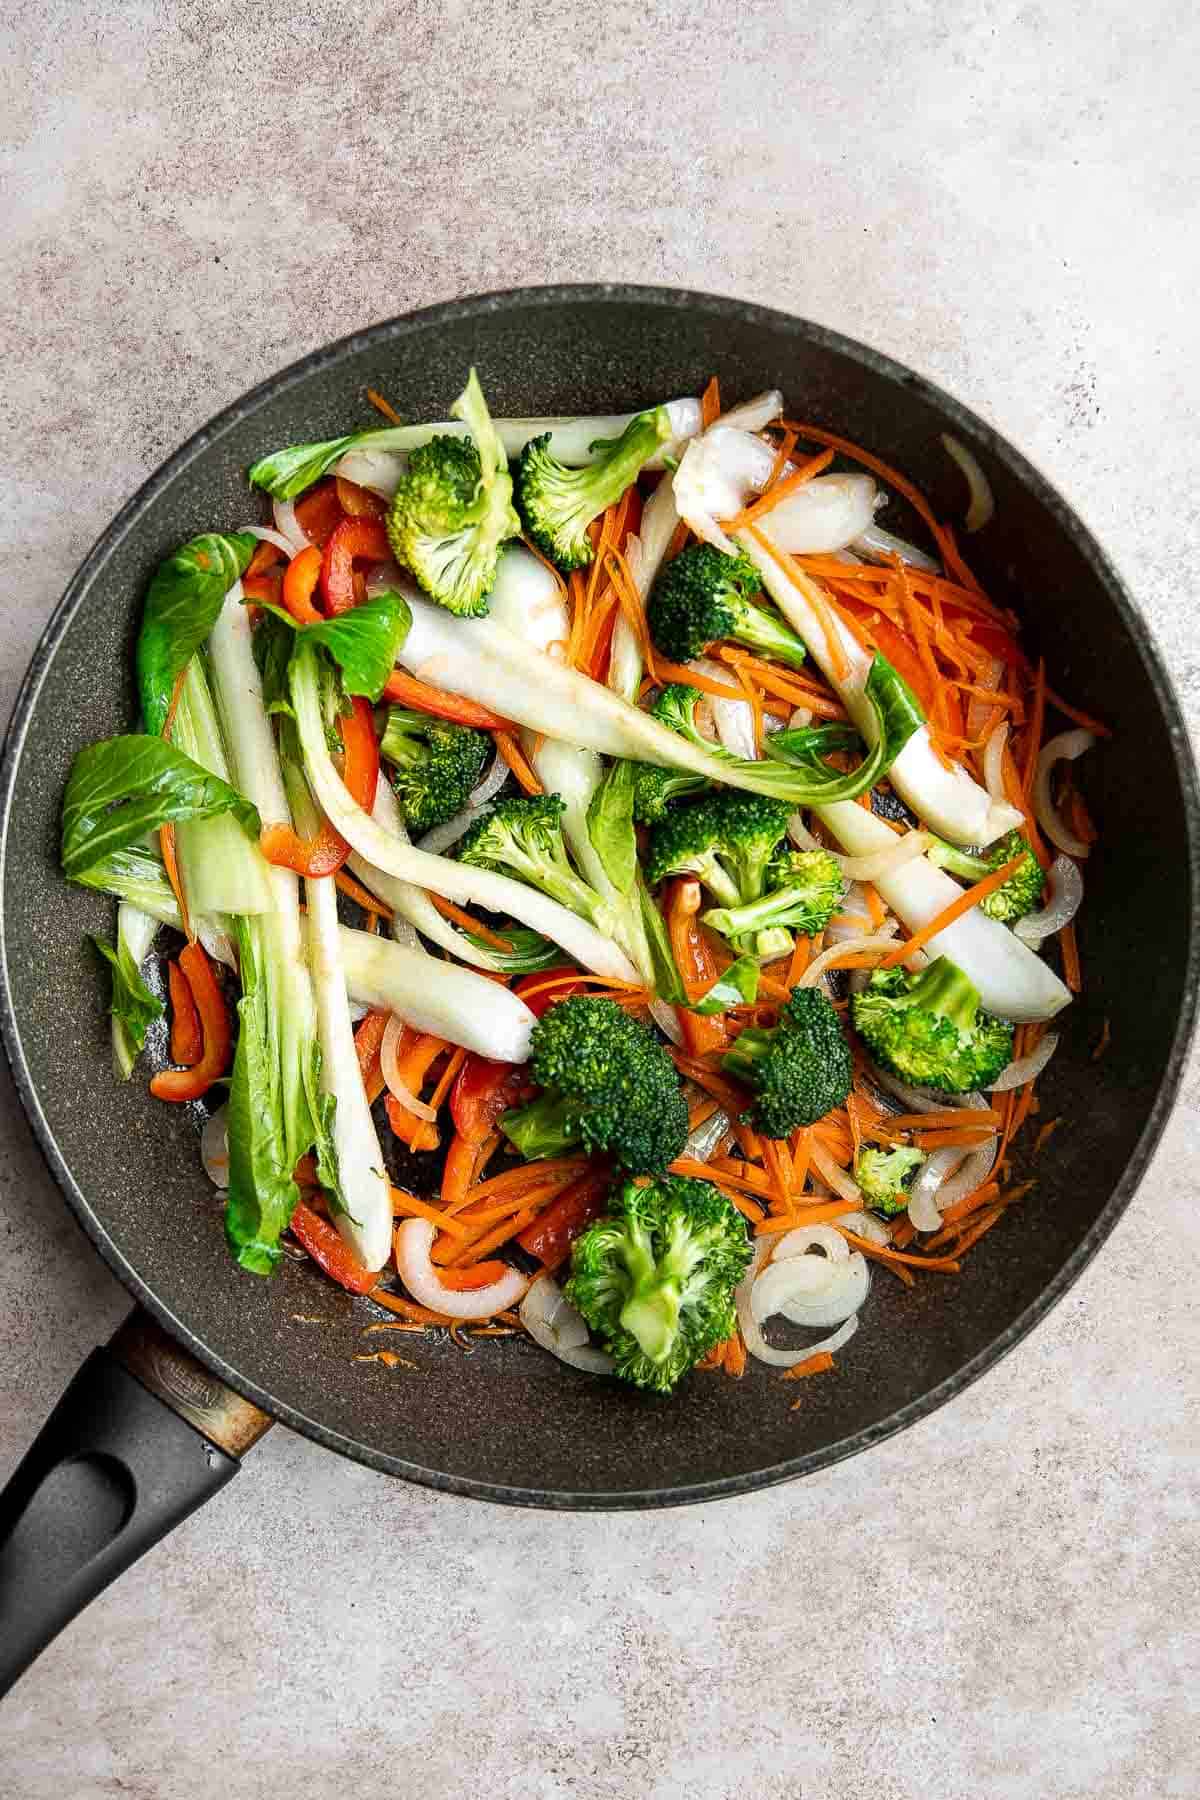 Chicken Chow Mein is a classic Chinese noodle dish that is quick and easy to make at home in 20 minutes — faster, healthier, and better than takeout. | aheadofthyme.com